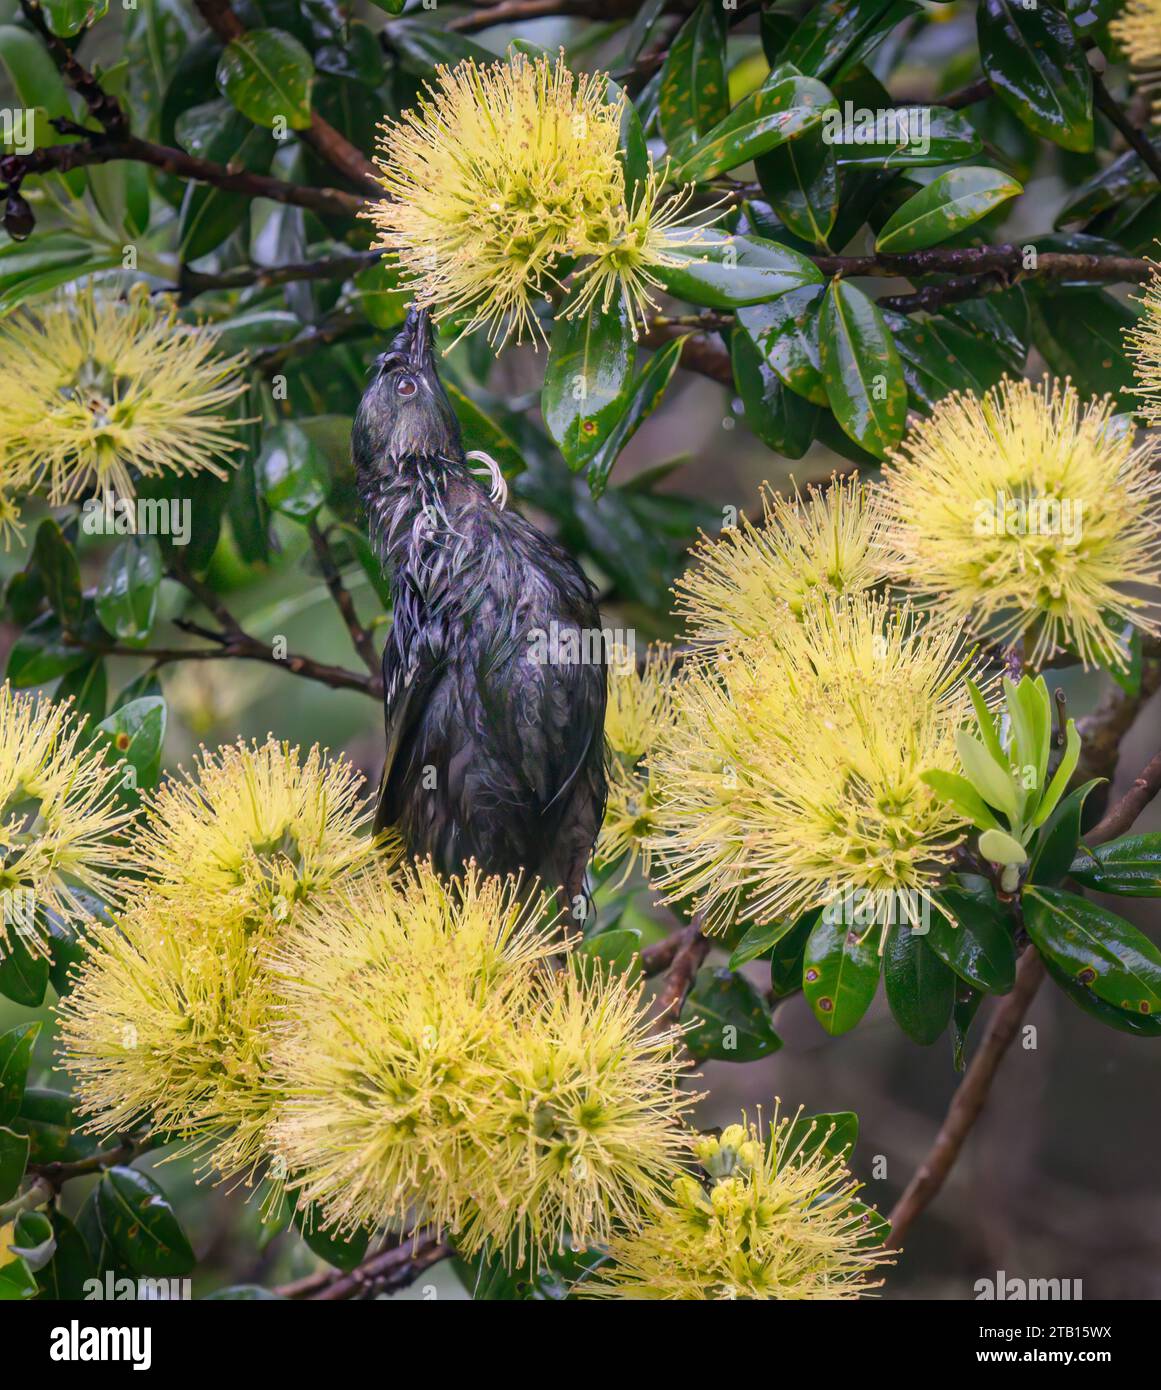 Tui bird is feeding on nectar on yellow Pohutukawa flowers. Tui is wet in the rain. Auckland. Vertical format. Stock Photo